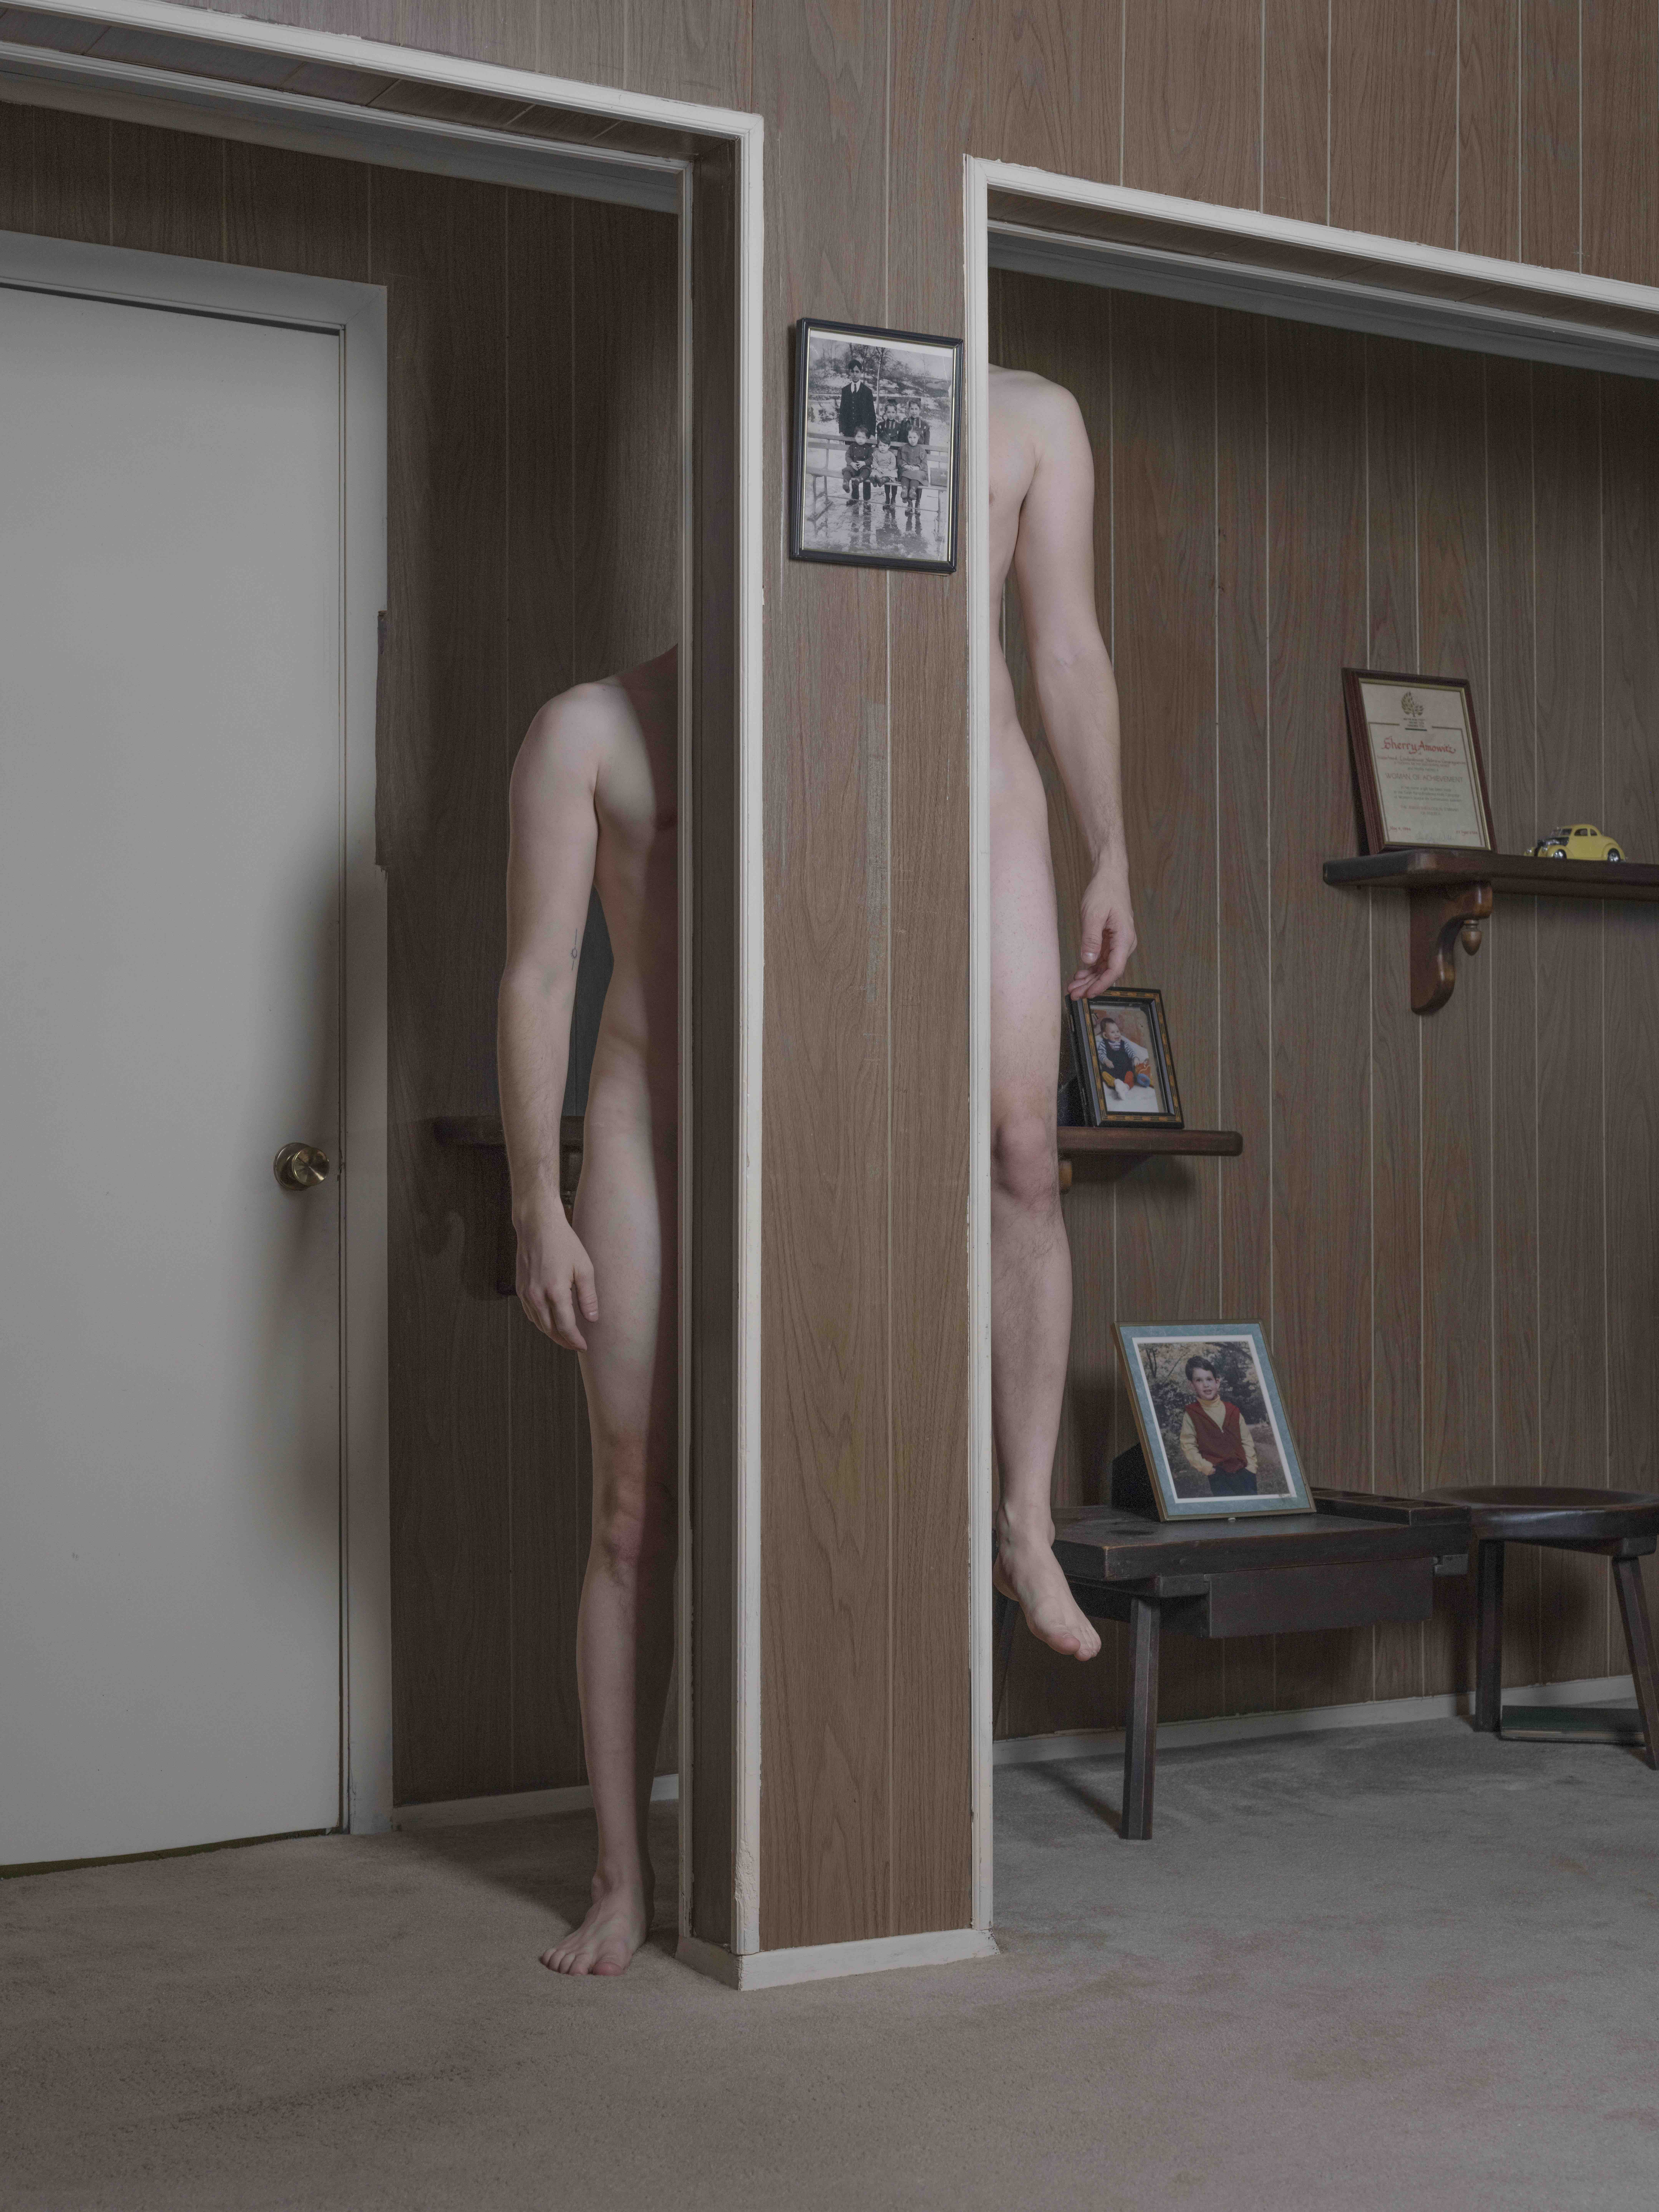 ben zank surreal self portraits surreal photography nothing to see here book